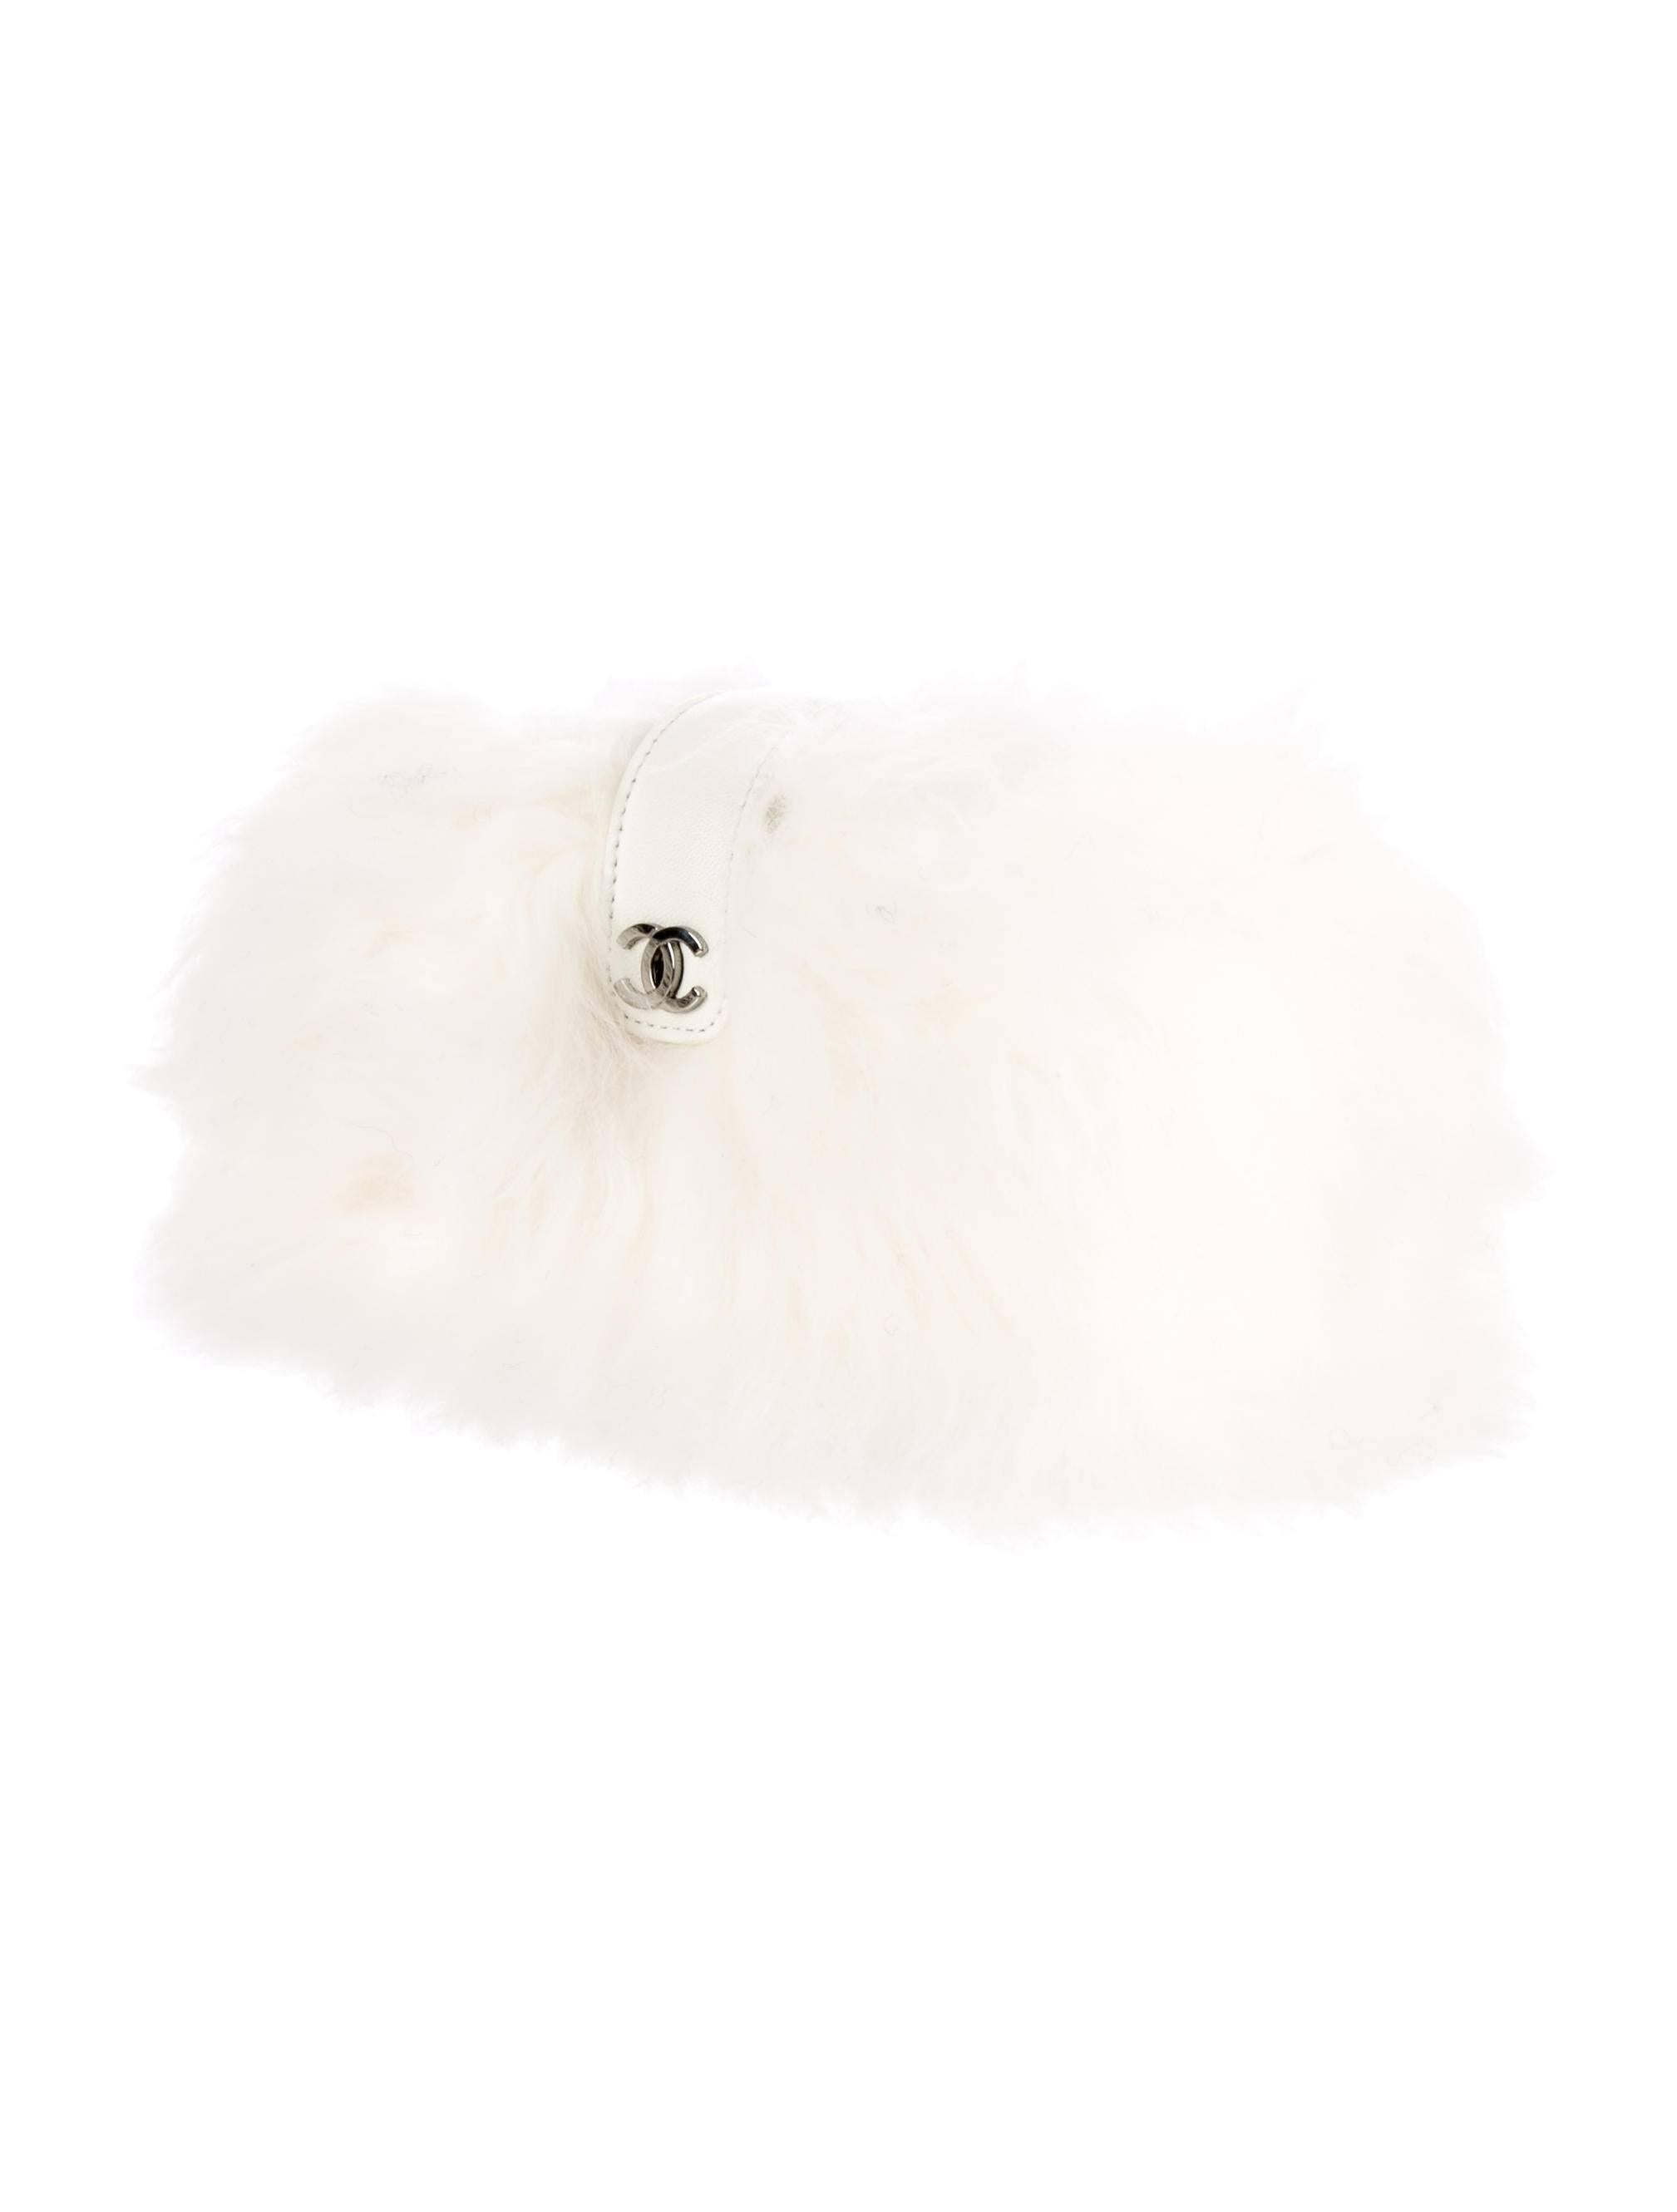 CURATOR'S NOTES

Incredibly beautiful and rare brand NEW Chanel white rabbit fur pearl chain shoulder bag. Includes original Chanel authenticity card and box making it the perfect gift!

Rabbit fur
Pearl chain strap
Gunmetal hardware
Suede